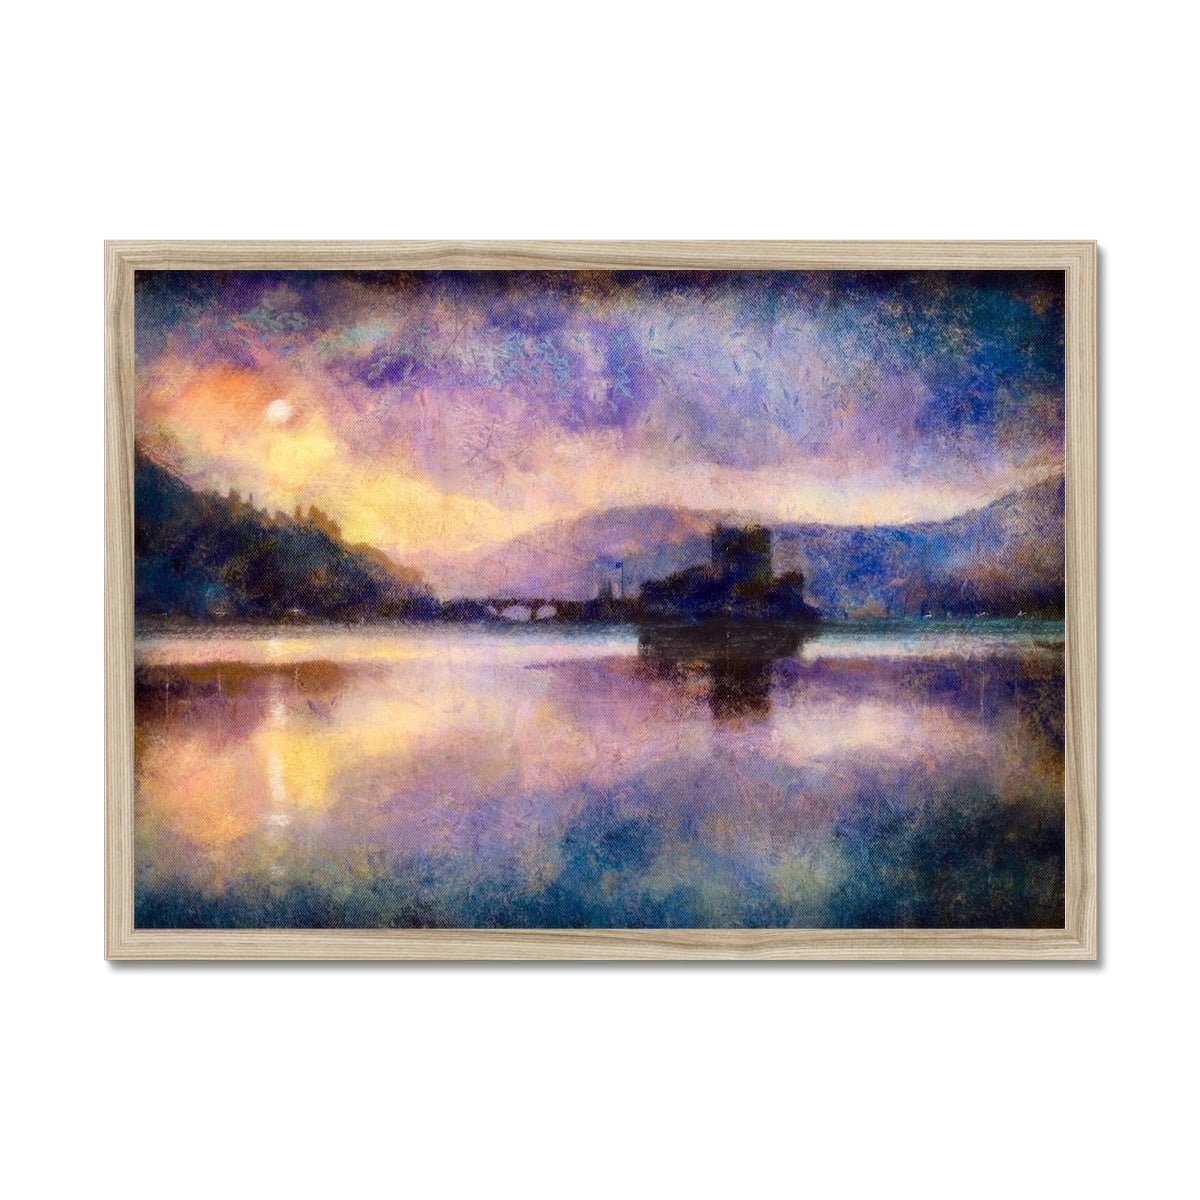 Eilean Donan Castle Moonlight Painting | Framed Prints From Scotland-Framed Prints-Scottish Castles Art Gallery-A2 Landscape-Natural Frame-Paintings, Prints, Homeware, Art Gifts From Scotland By Scottish Artist Kevin Hunter